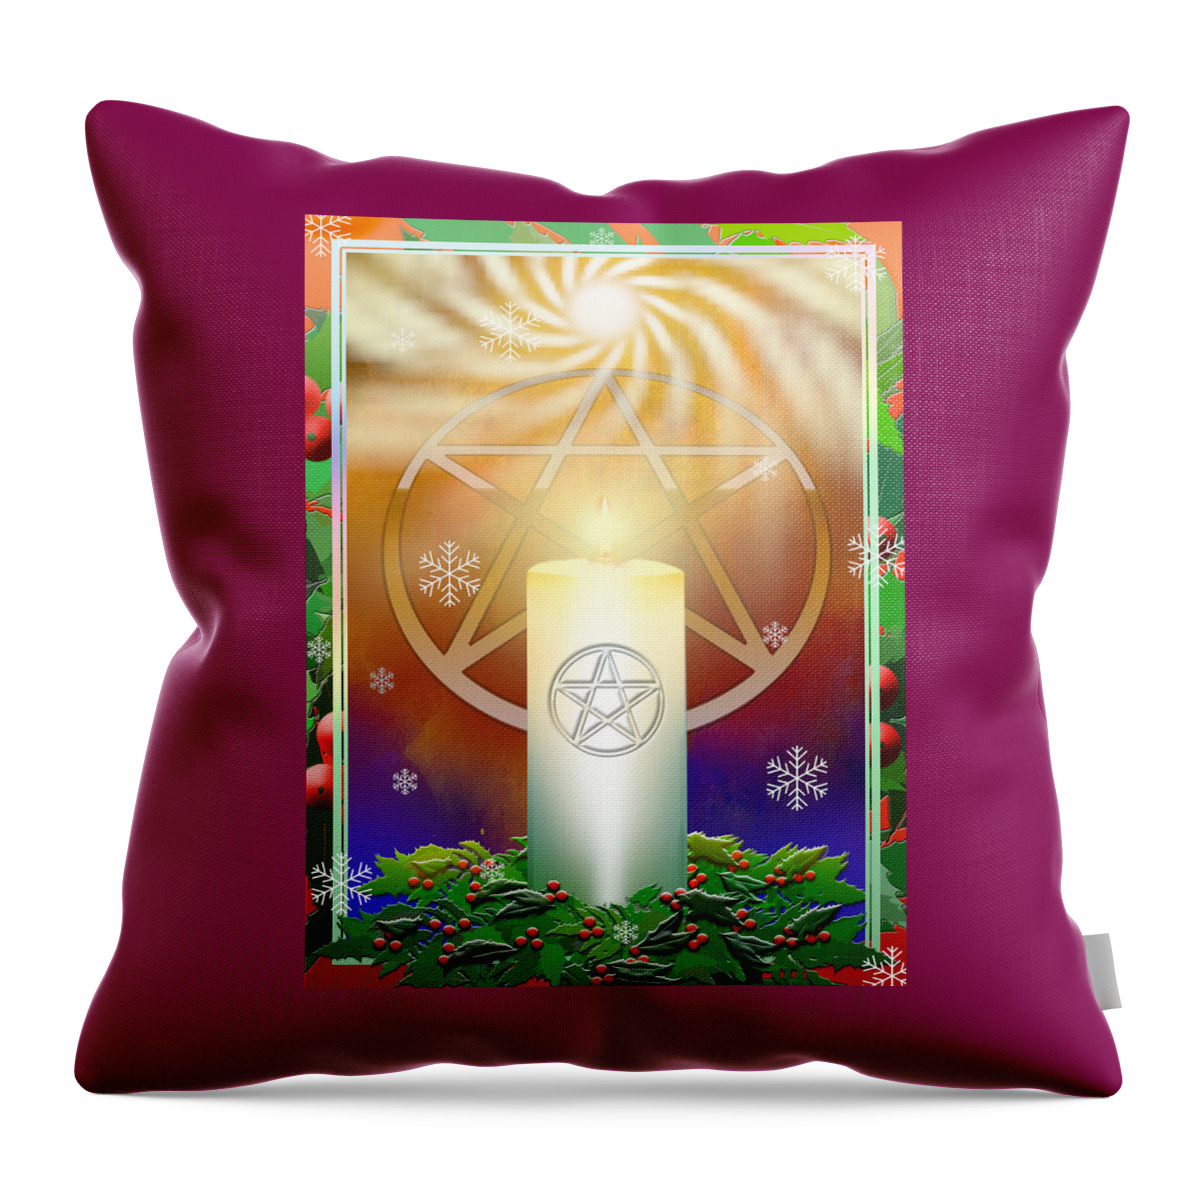 Yule Throw Pillow featuring the digital art Yule Sun by Melissa A Benson